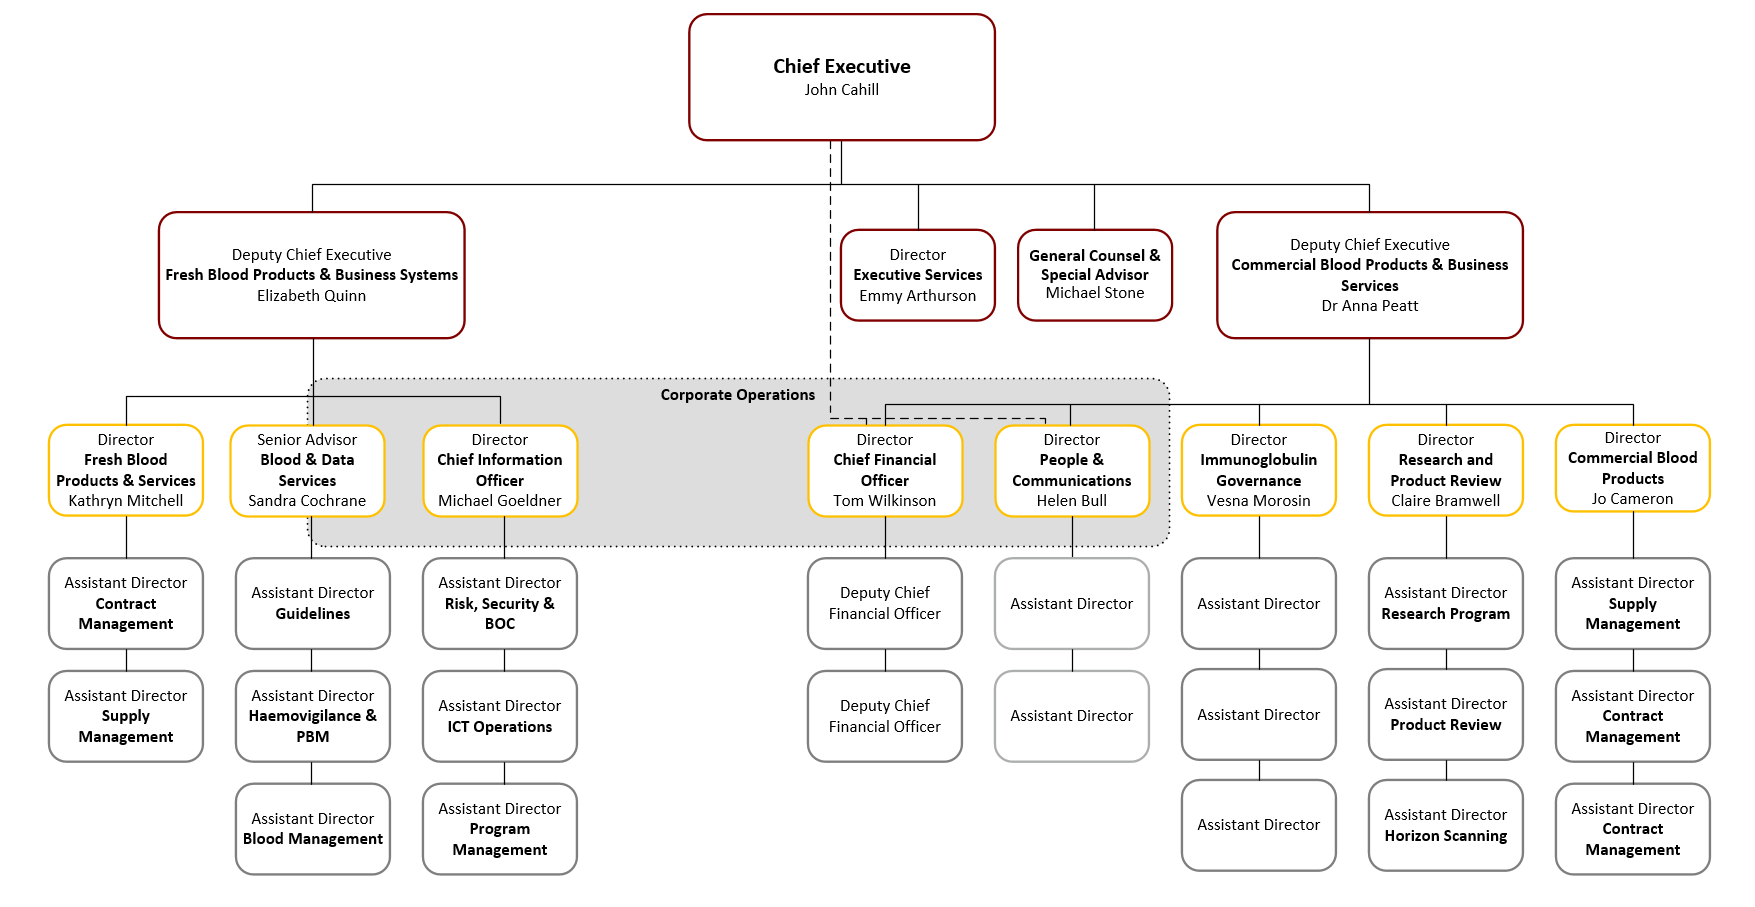 Image of organisational structure from CE to assistant director level for the NBA